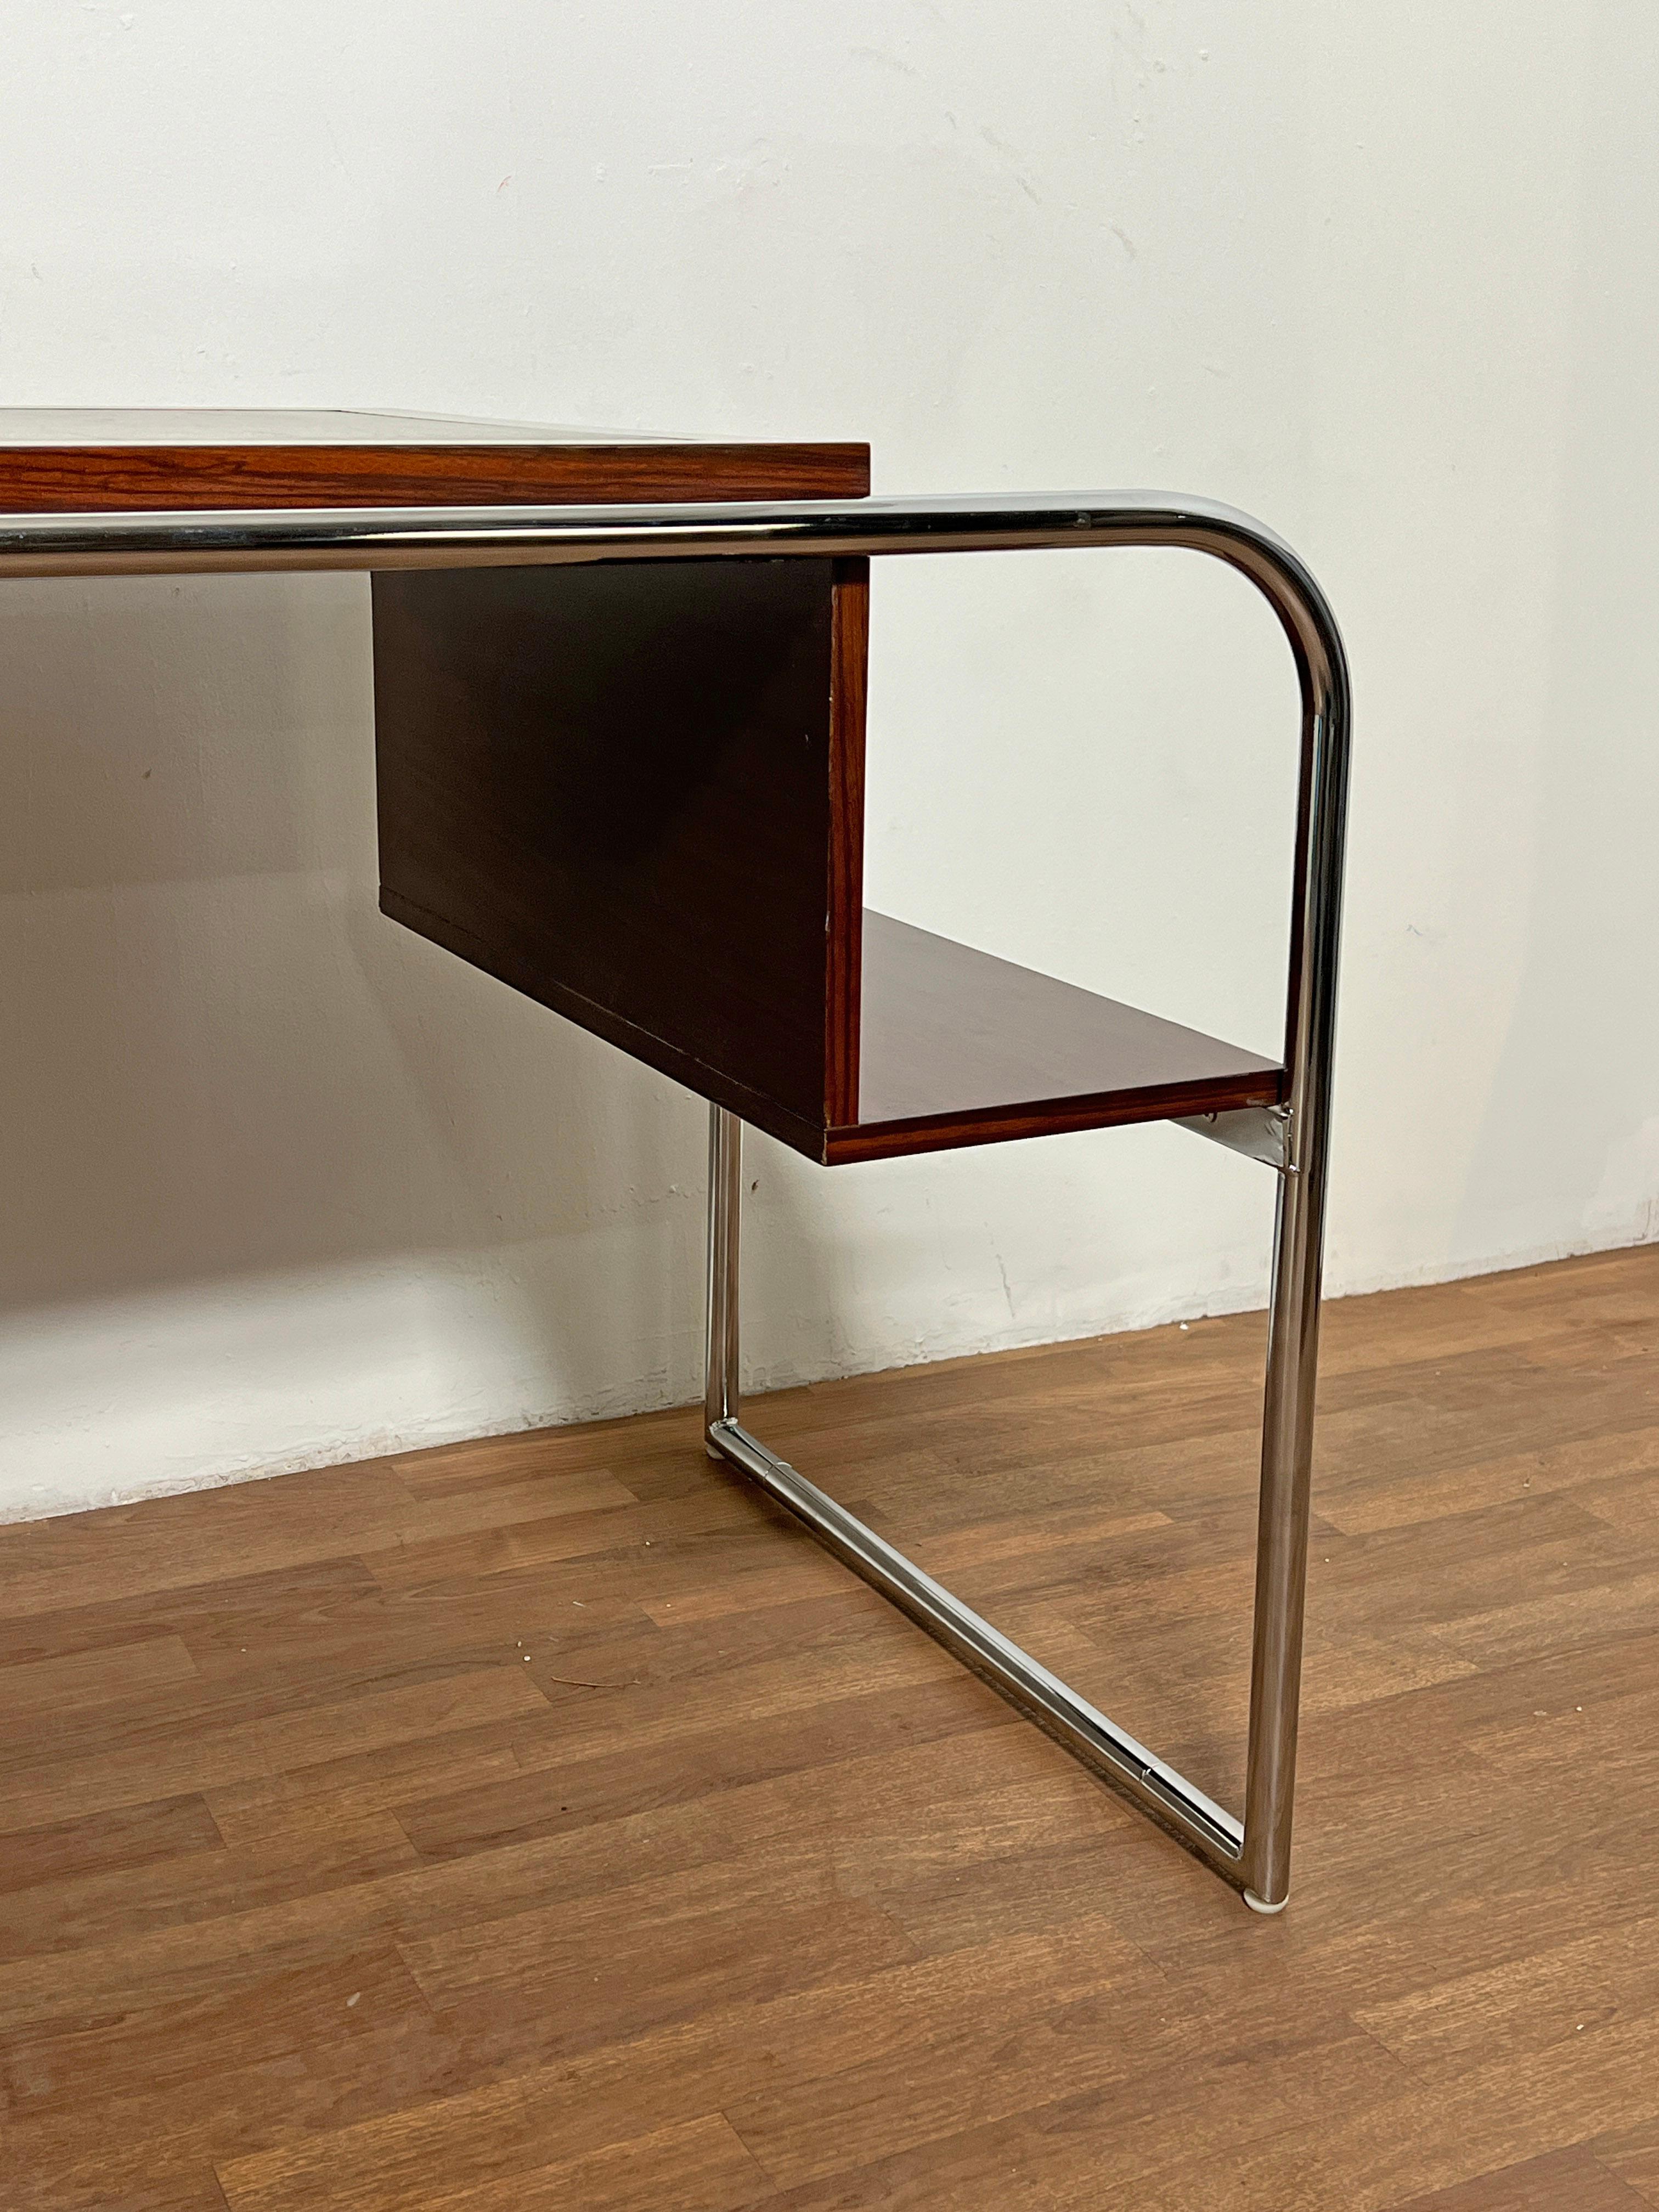 Ralph Lauren Bauhaus Inspired Desk in Rosewood, Chrome and Leather In Good Condition For Sale In Peabody, MA